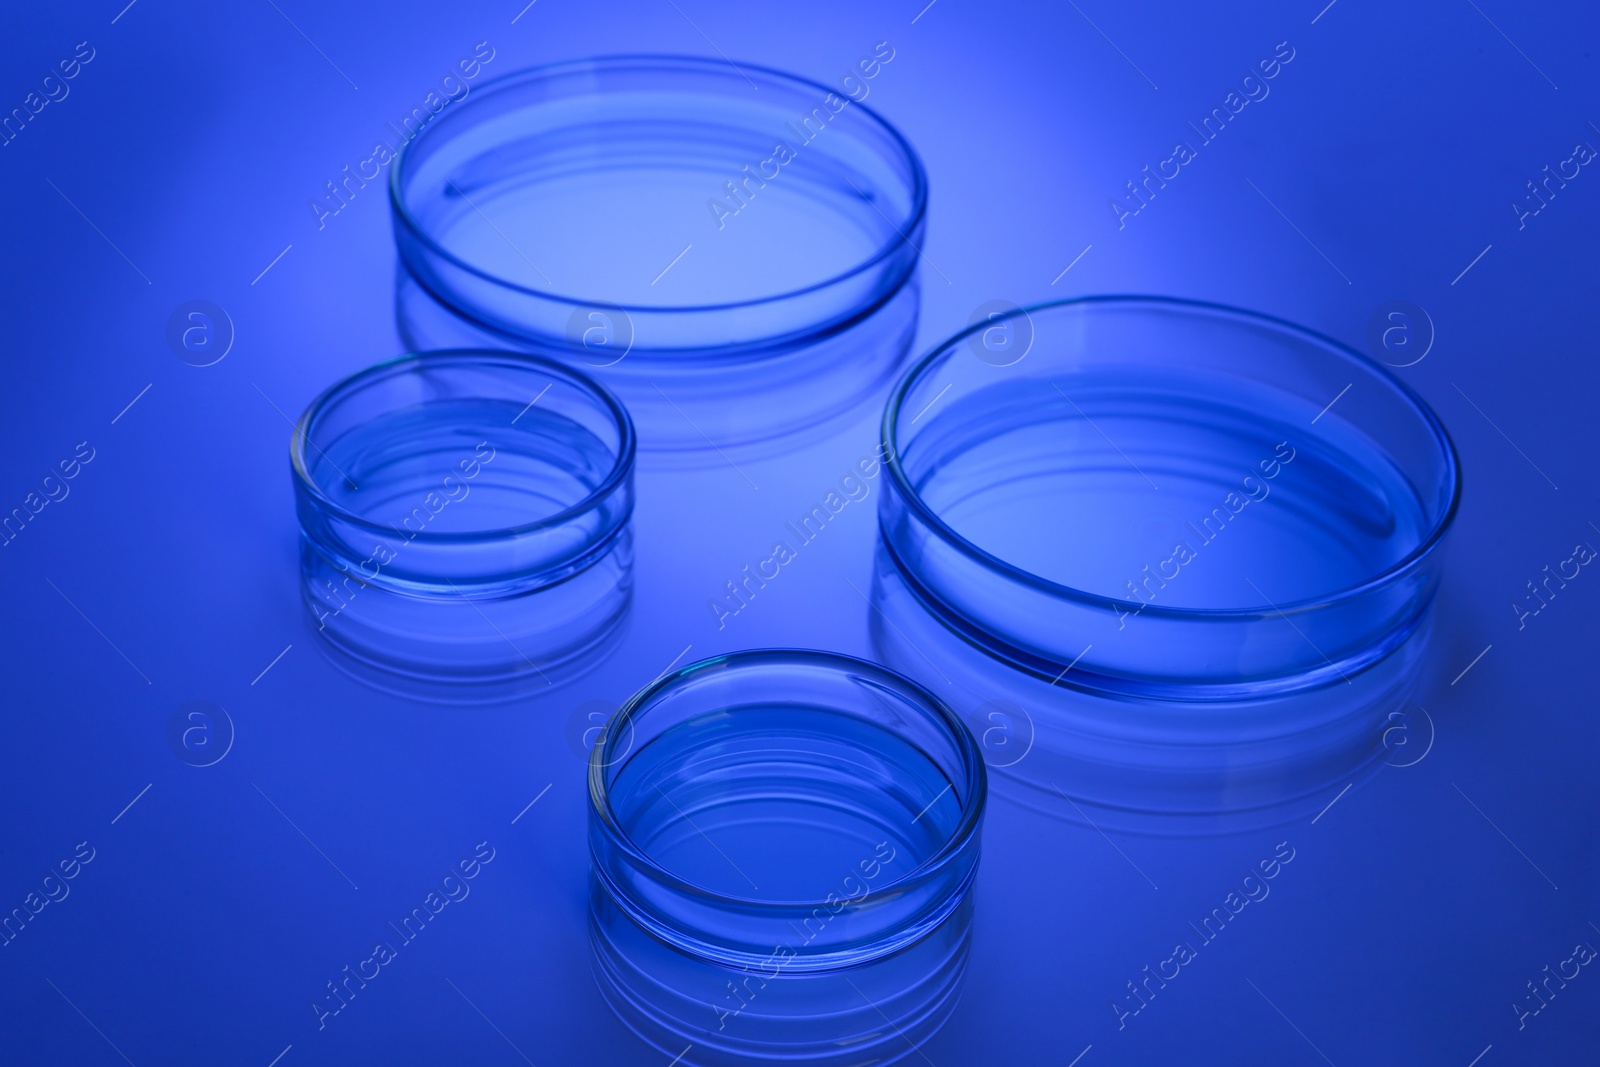 Photo of Petri dishes with liquid on table, toned in blue